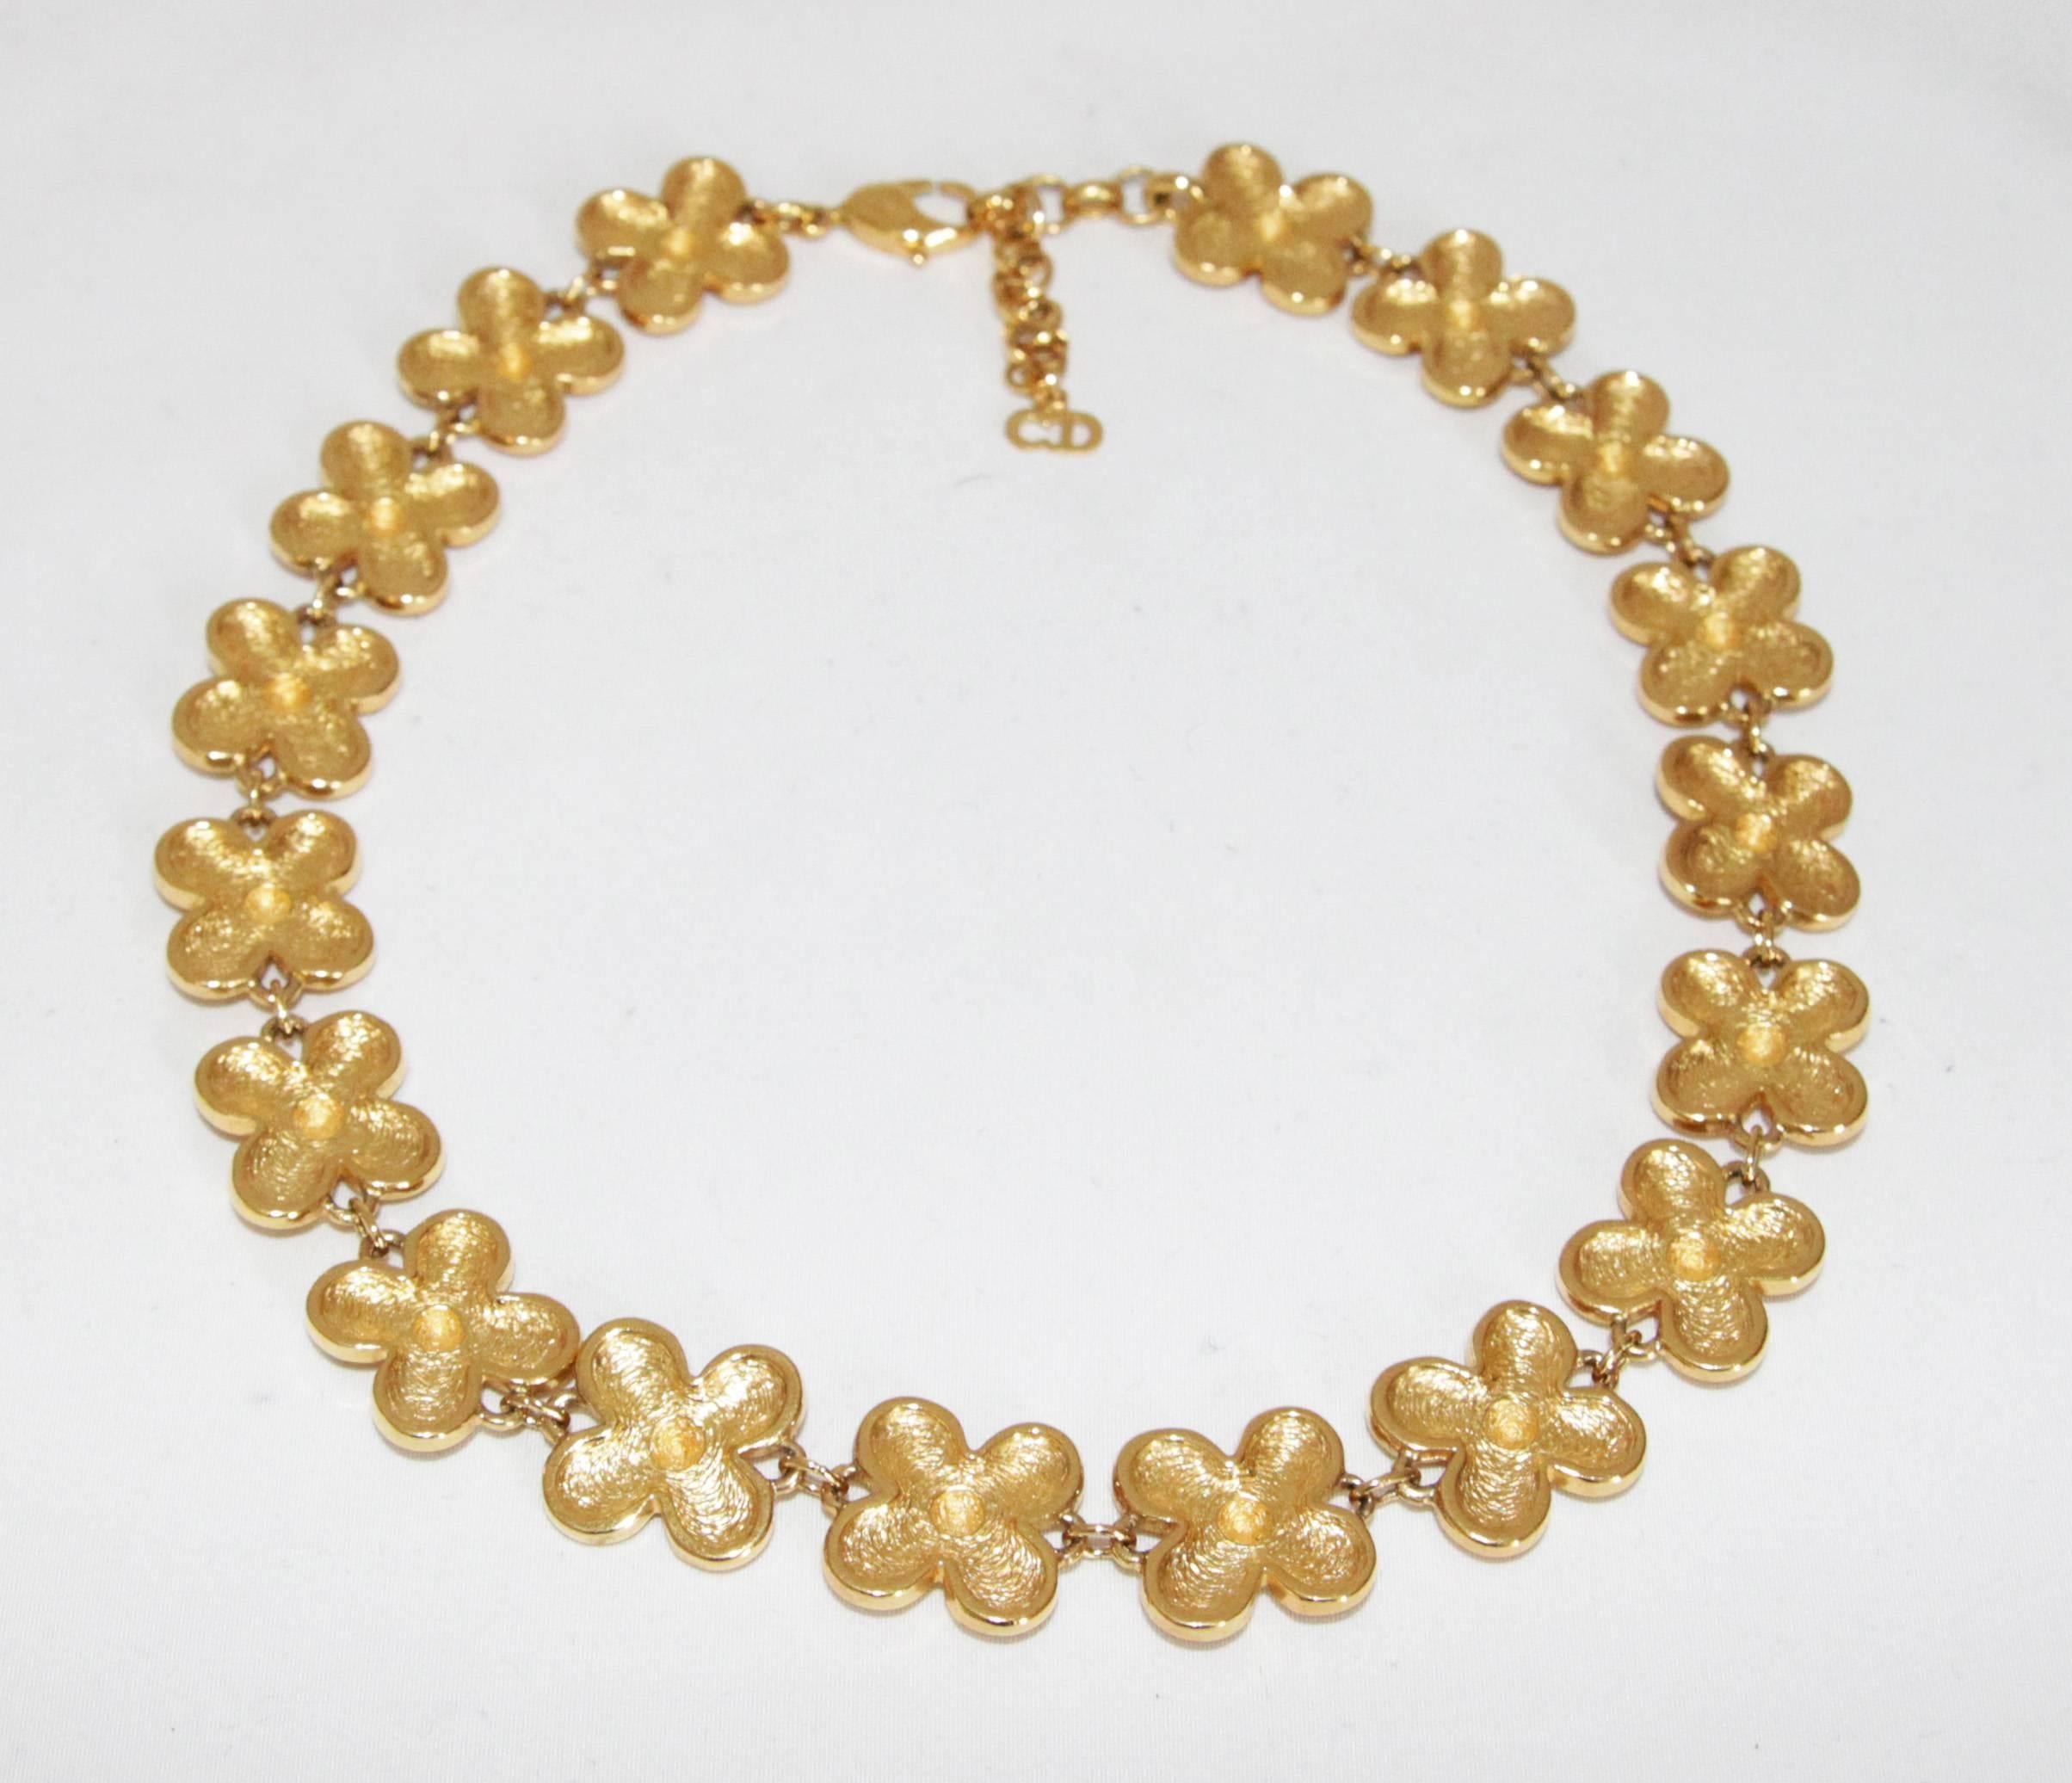 Very delicate Christian Dior vintage flowers necklace, circa 1980. Made of gilt metal. 

Marked : CD logo Chr. Dior Germany

Size : 47 x 2 cm - 18.5 x 0.8 in.

Excellent vintage condition